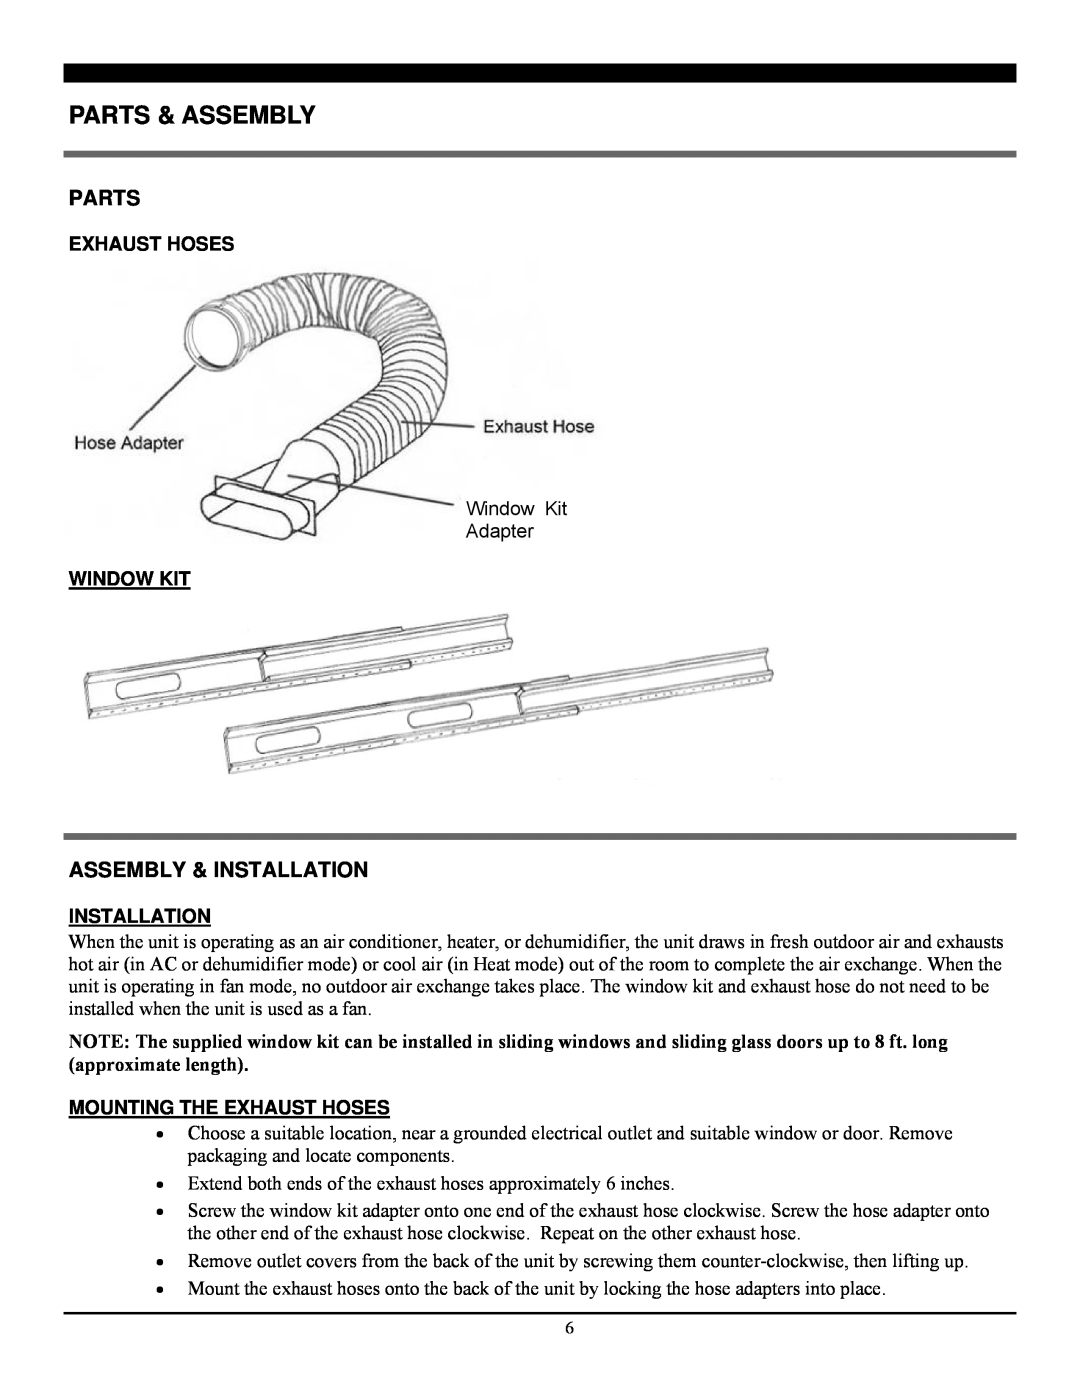 Soleus Air LX-140 manual Parts & Assembly, Assembly & Installation, Window Kit, Mounting The Exhaust Hoses 